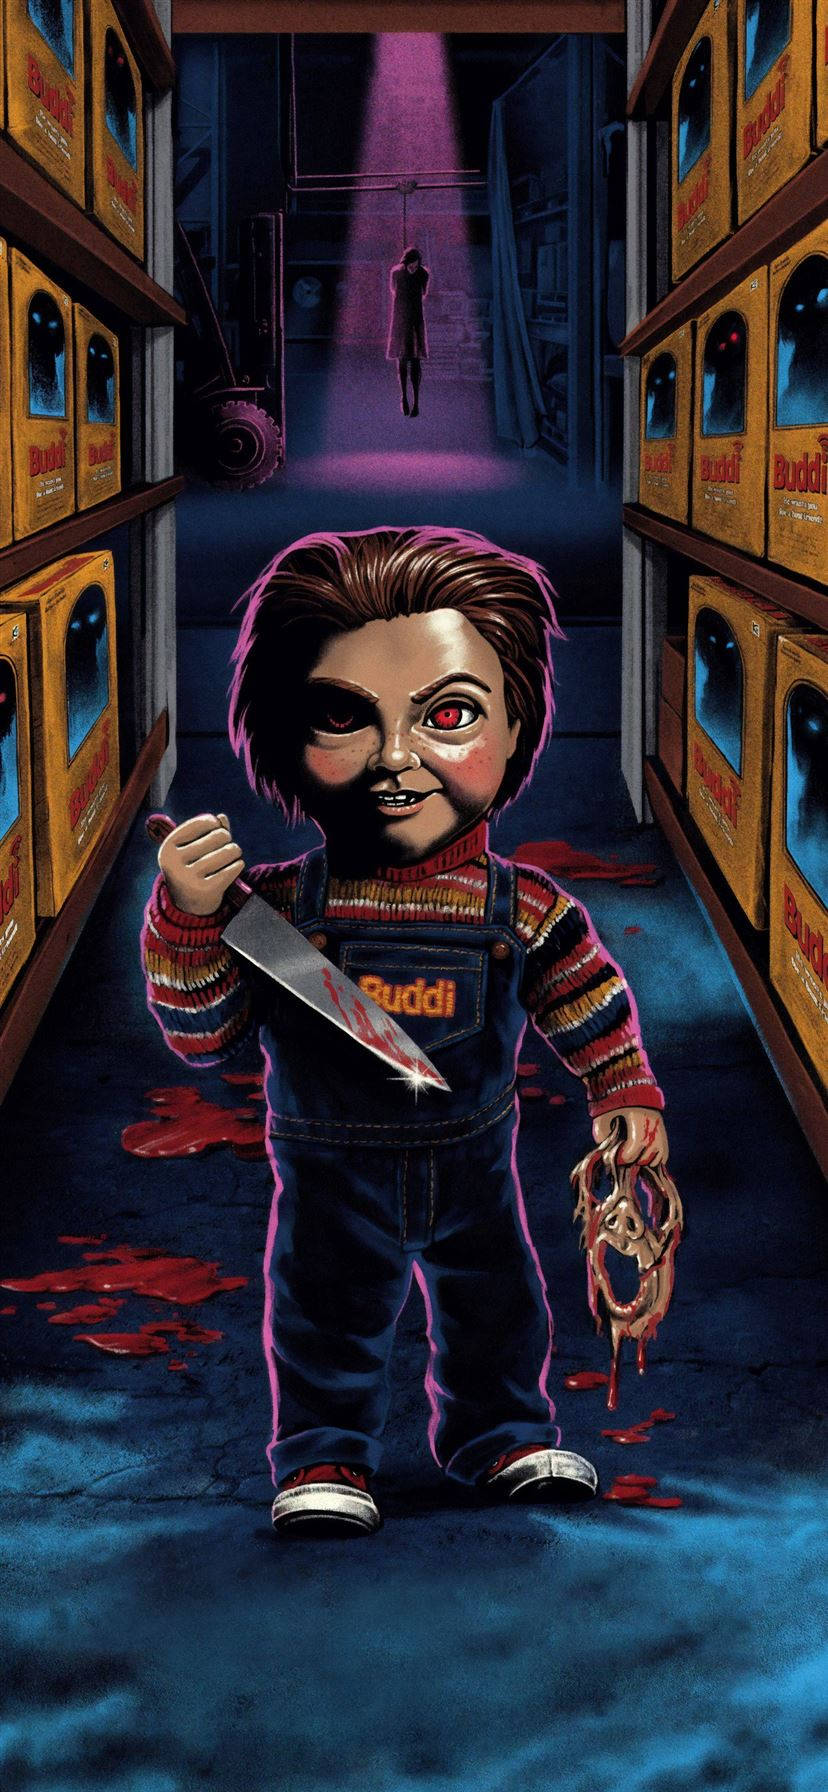 Chucky Child's Play 2019 Poster Wallpaper